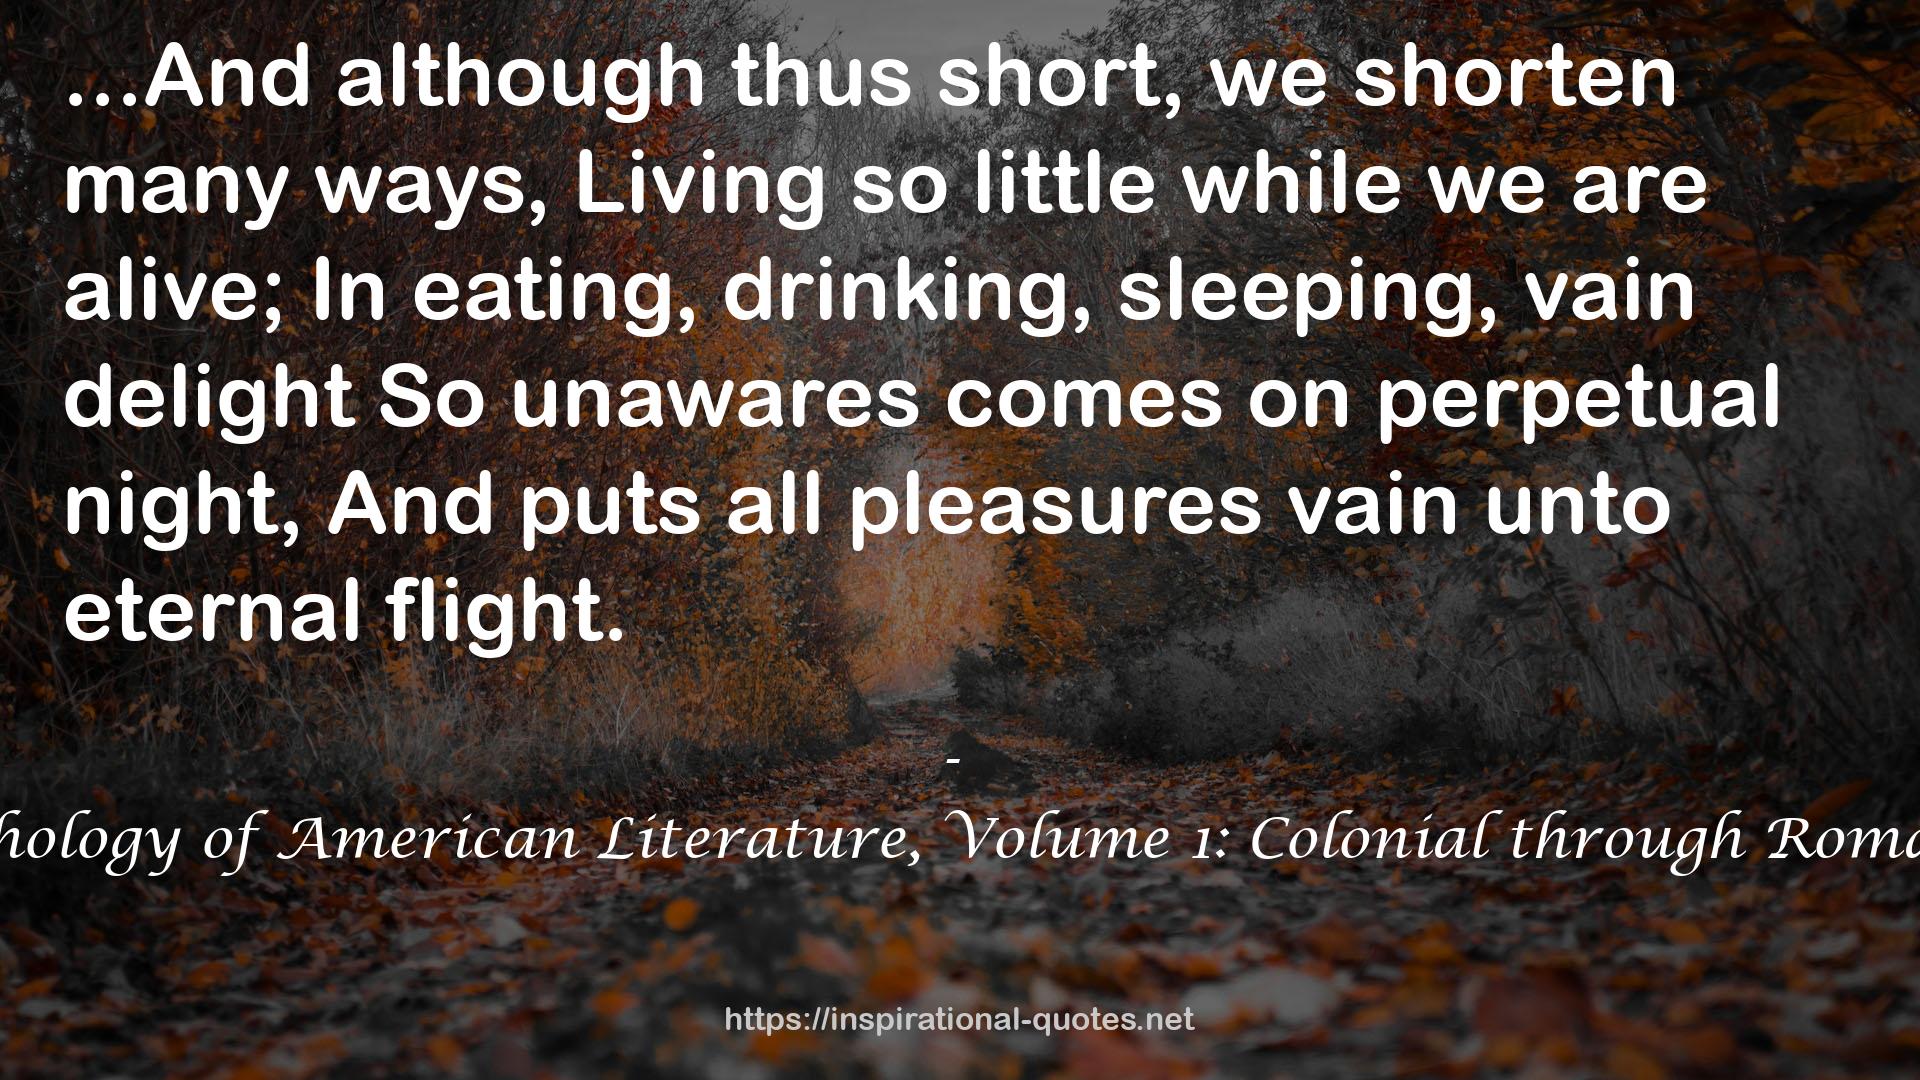 Anthology of American Literature, Volume 1: Colonial through Romantic QUOTES